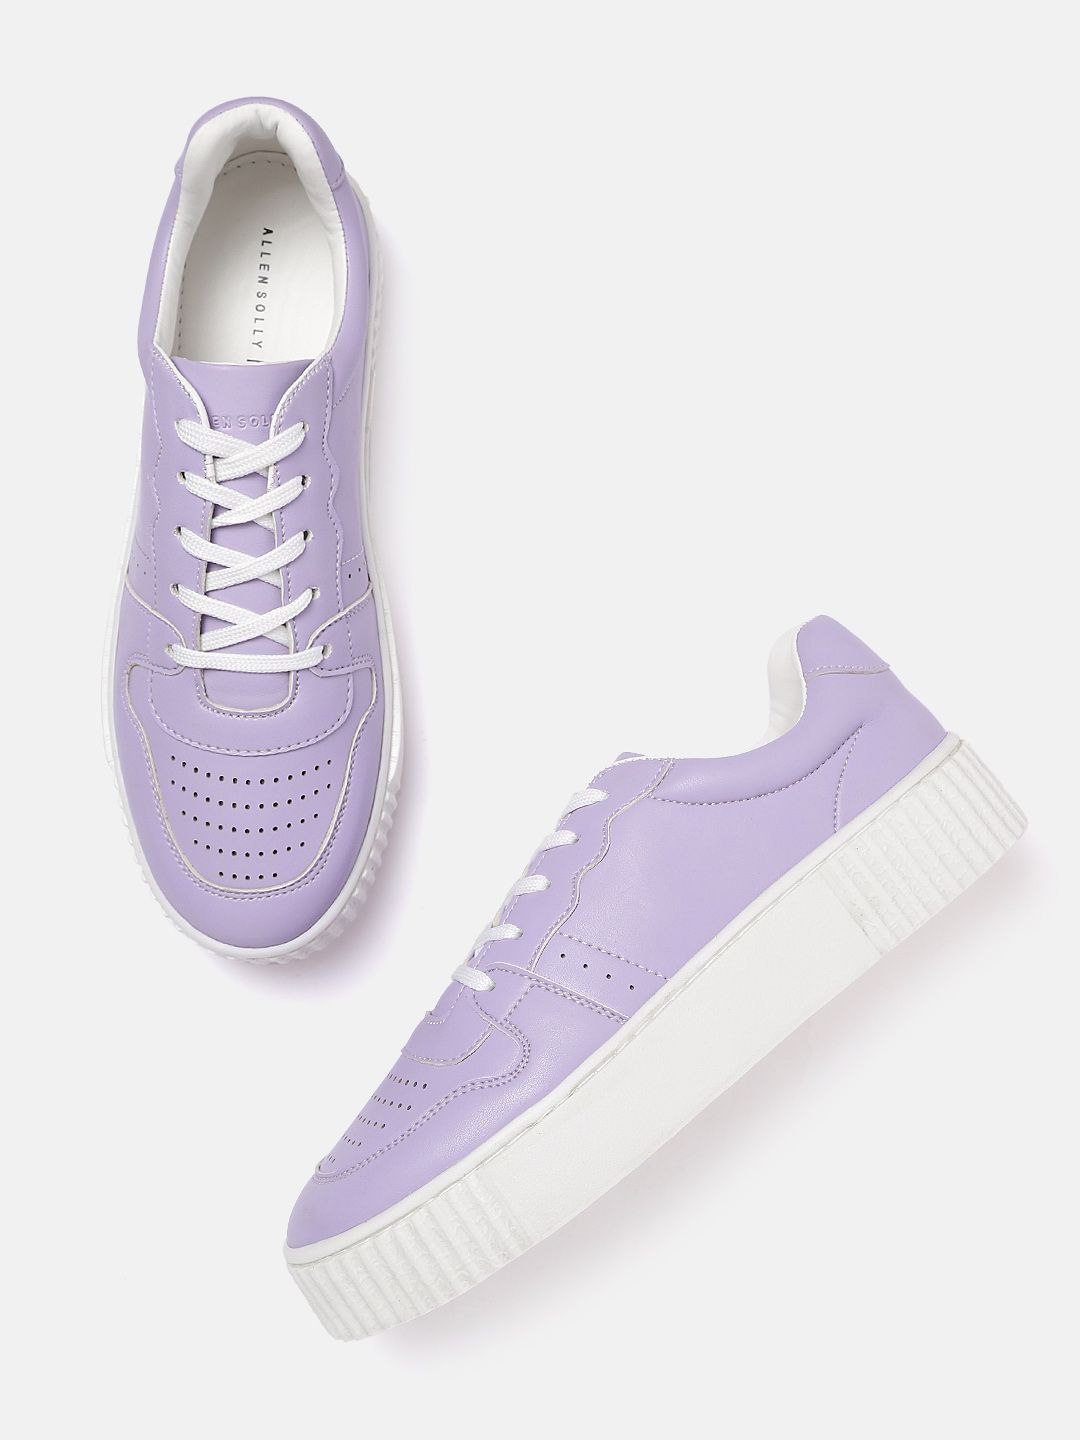 Allen Solly Women Lavender Perforated Flatform Sneakers Price in India